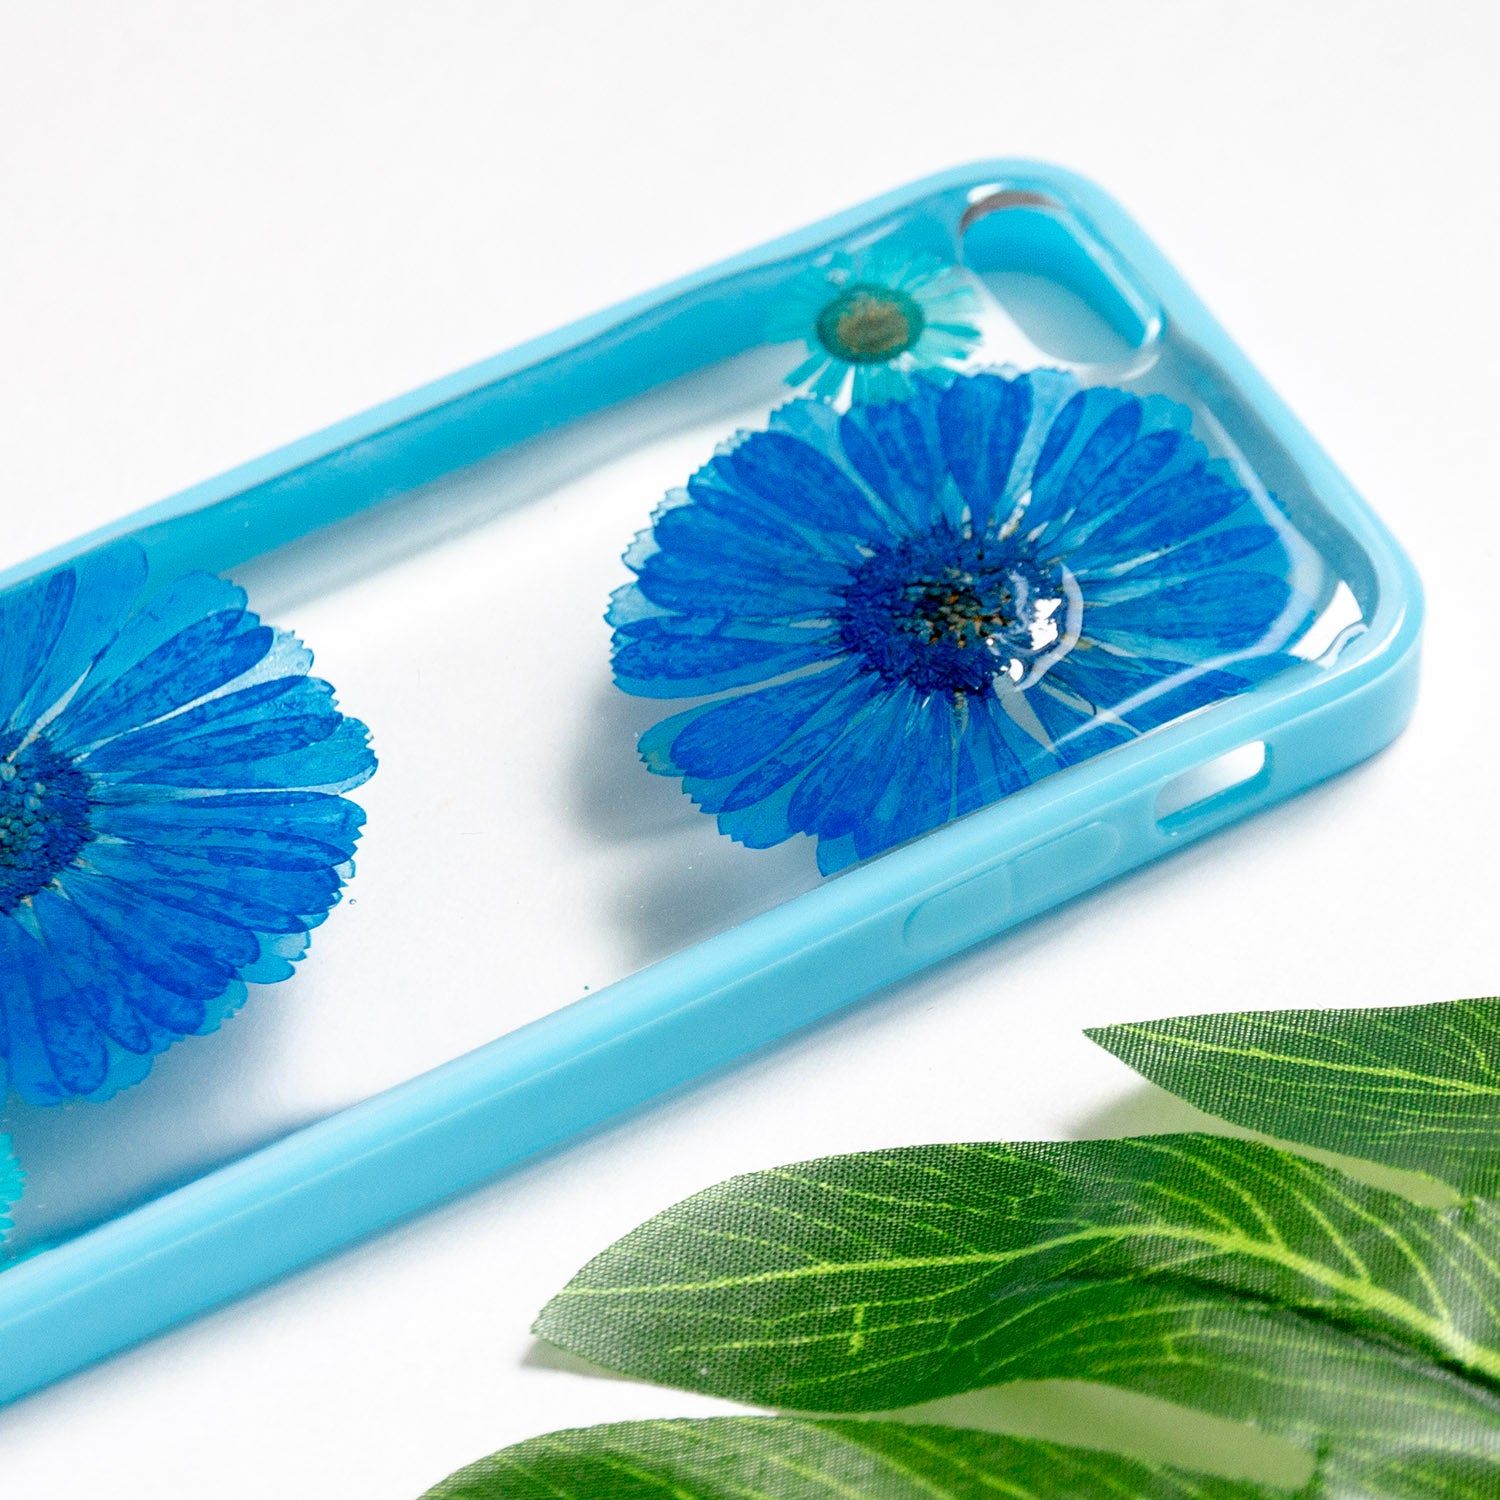 Floral Neverland Floralfy Blue Sapphire Real Pressed Blue Daisy Flower Floral Foliage Botanical iPhone 5 5s SE Bumper Case 05